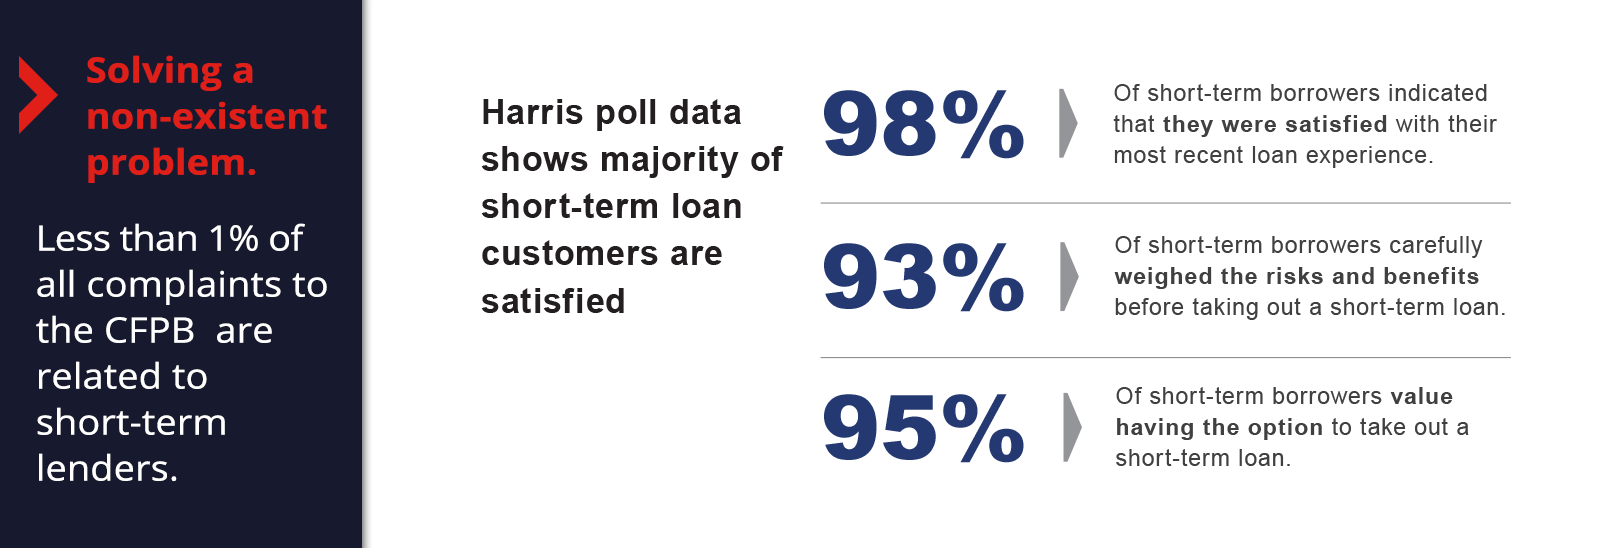 Solving a non-existent problem. Less than 1% of all complaints to the CFPB are related to short-term lenders. Harris poll statistics.